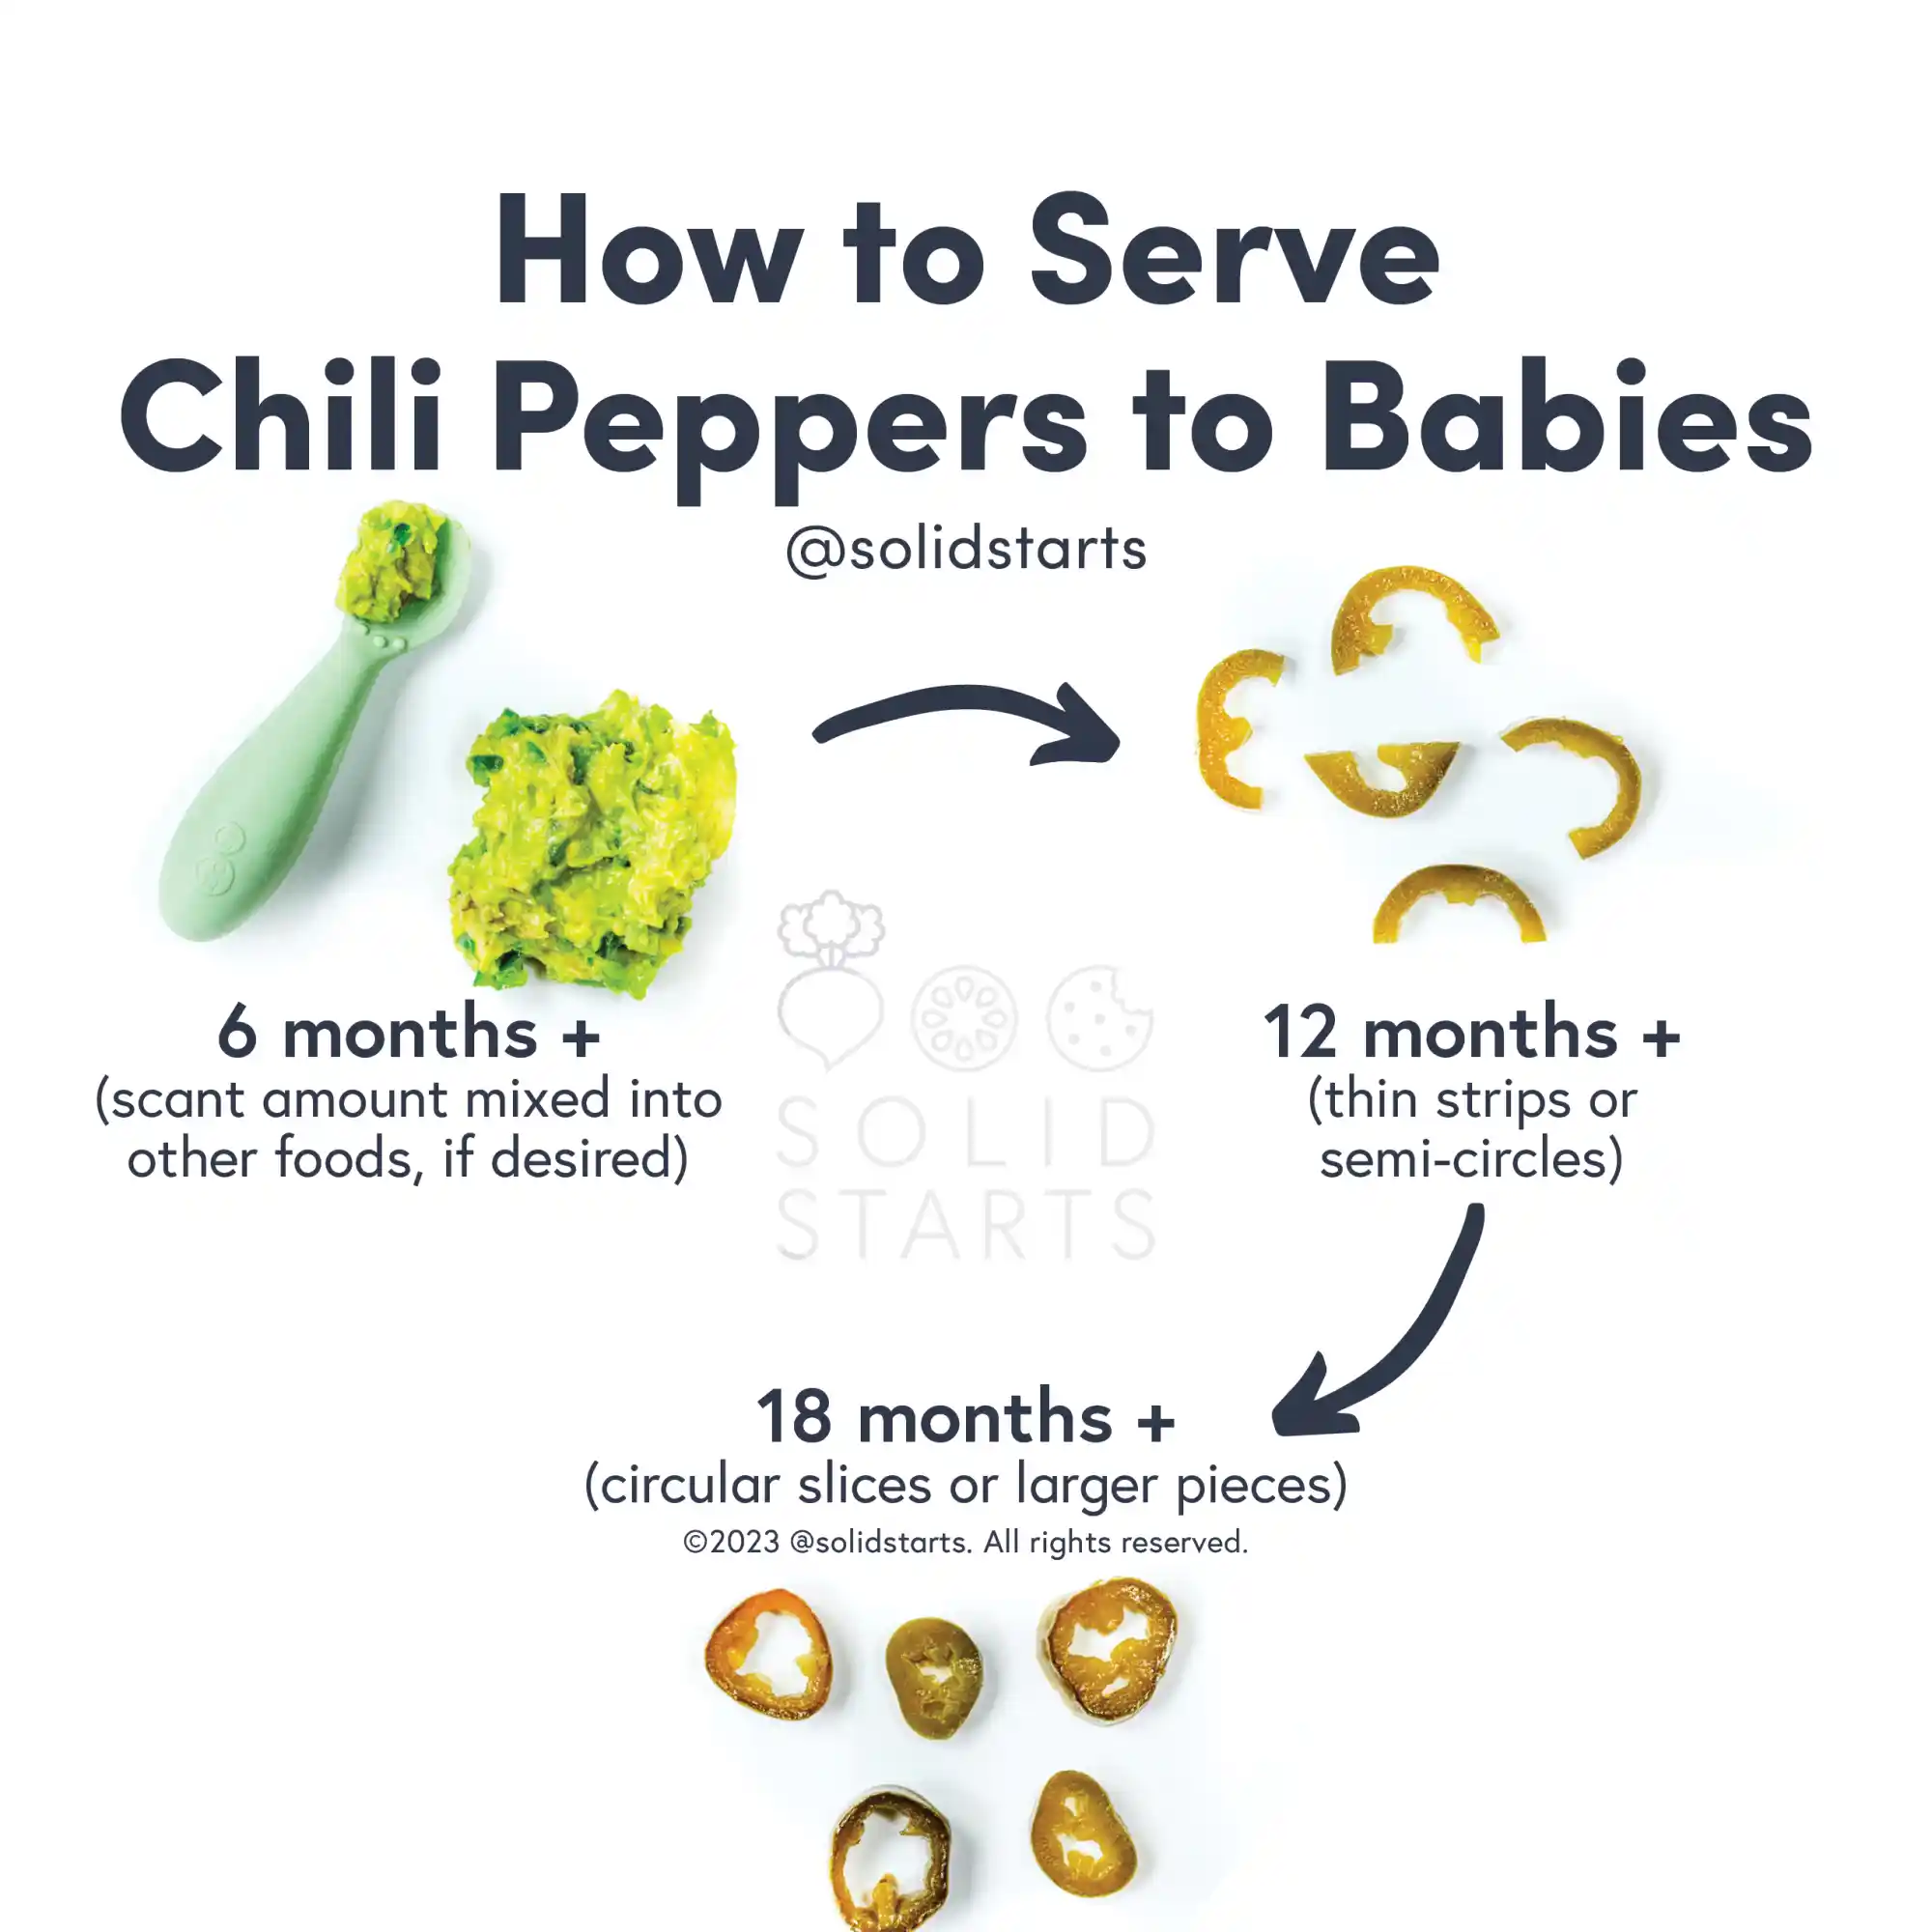 a Solid Starts infographic with the header How to Serve Chili Peppers to Babies: scant amount mixed into other foods for 6 mos+, thin strips or semi-circles for 12 mos+, circular slices or larger pieces for 18 mos+